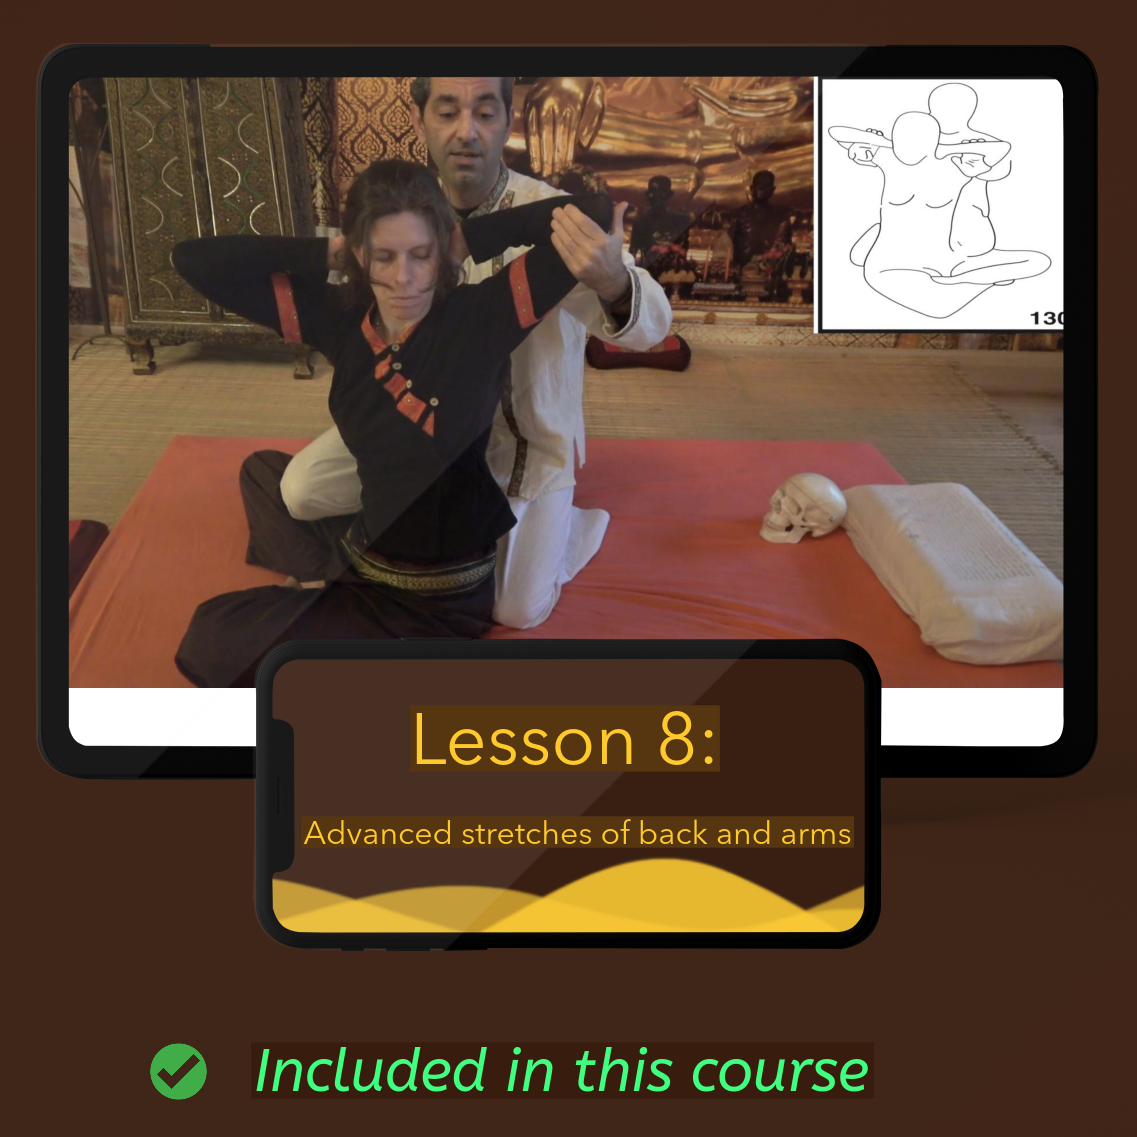 Level 2 - Lesson 8 Advanced stretches of back and arms